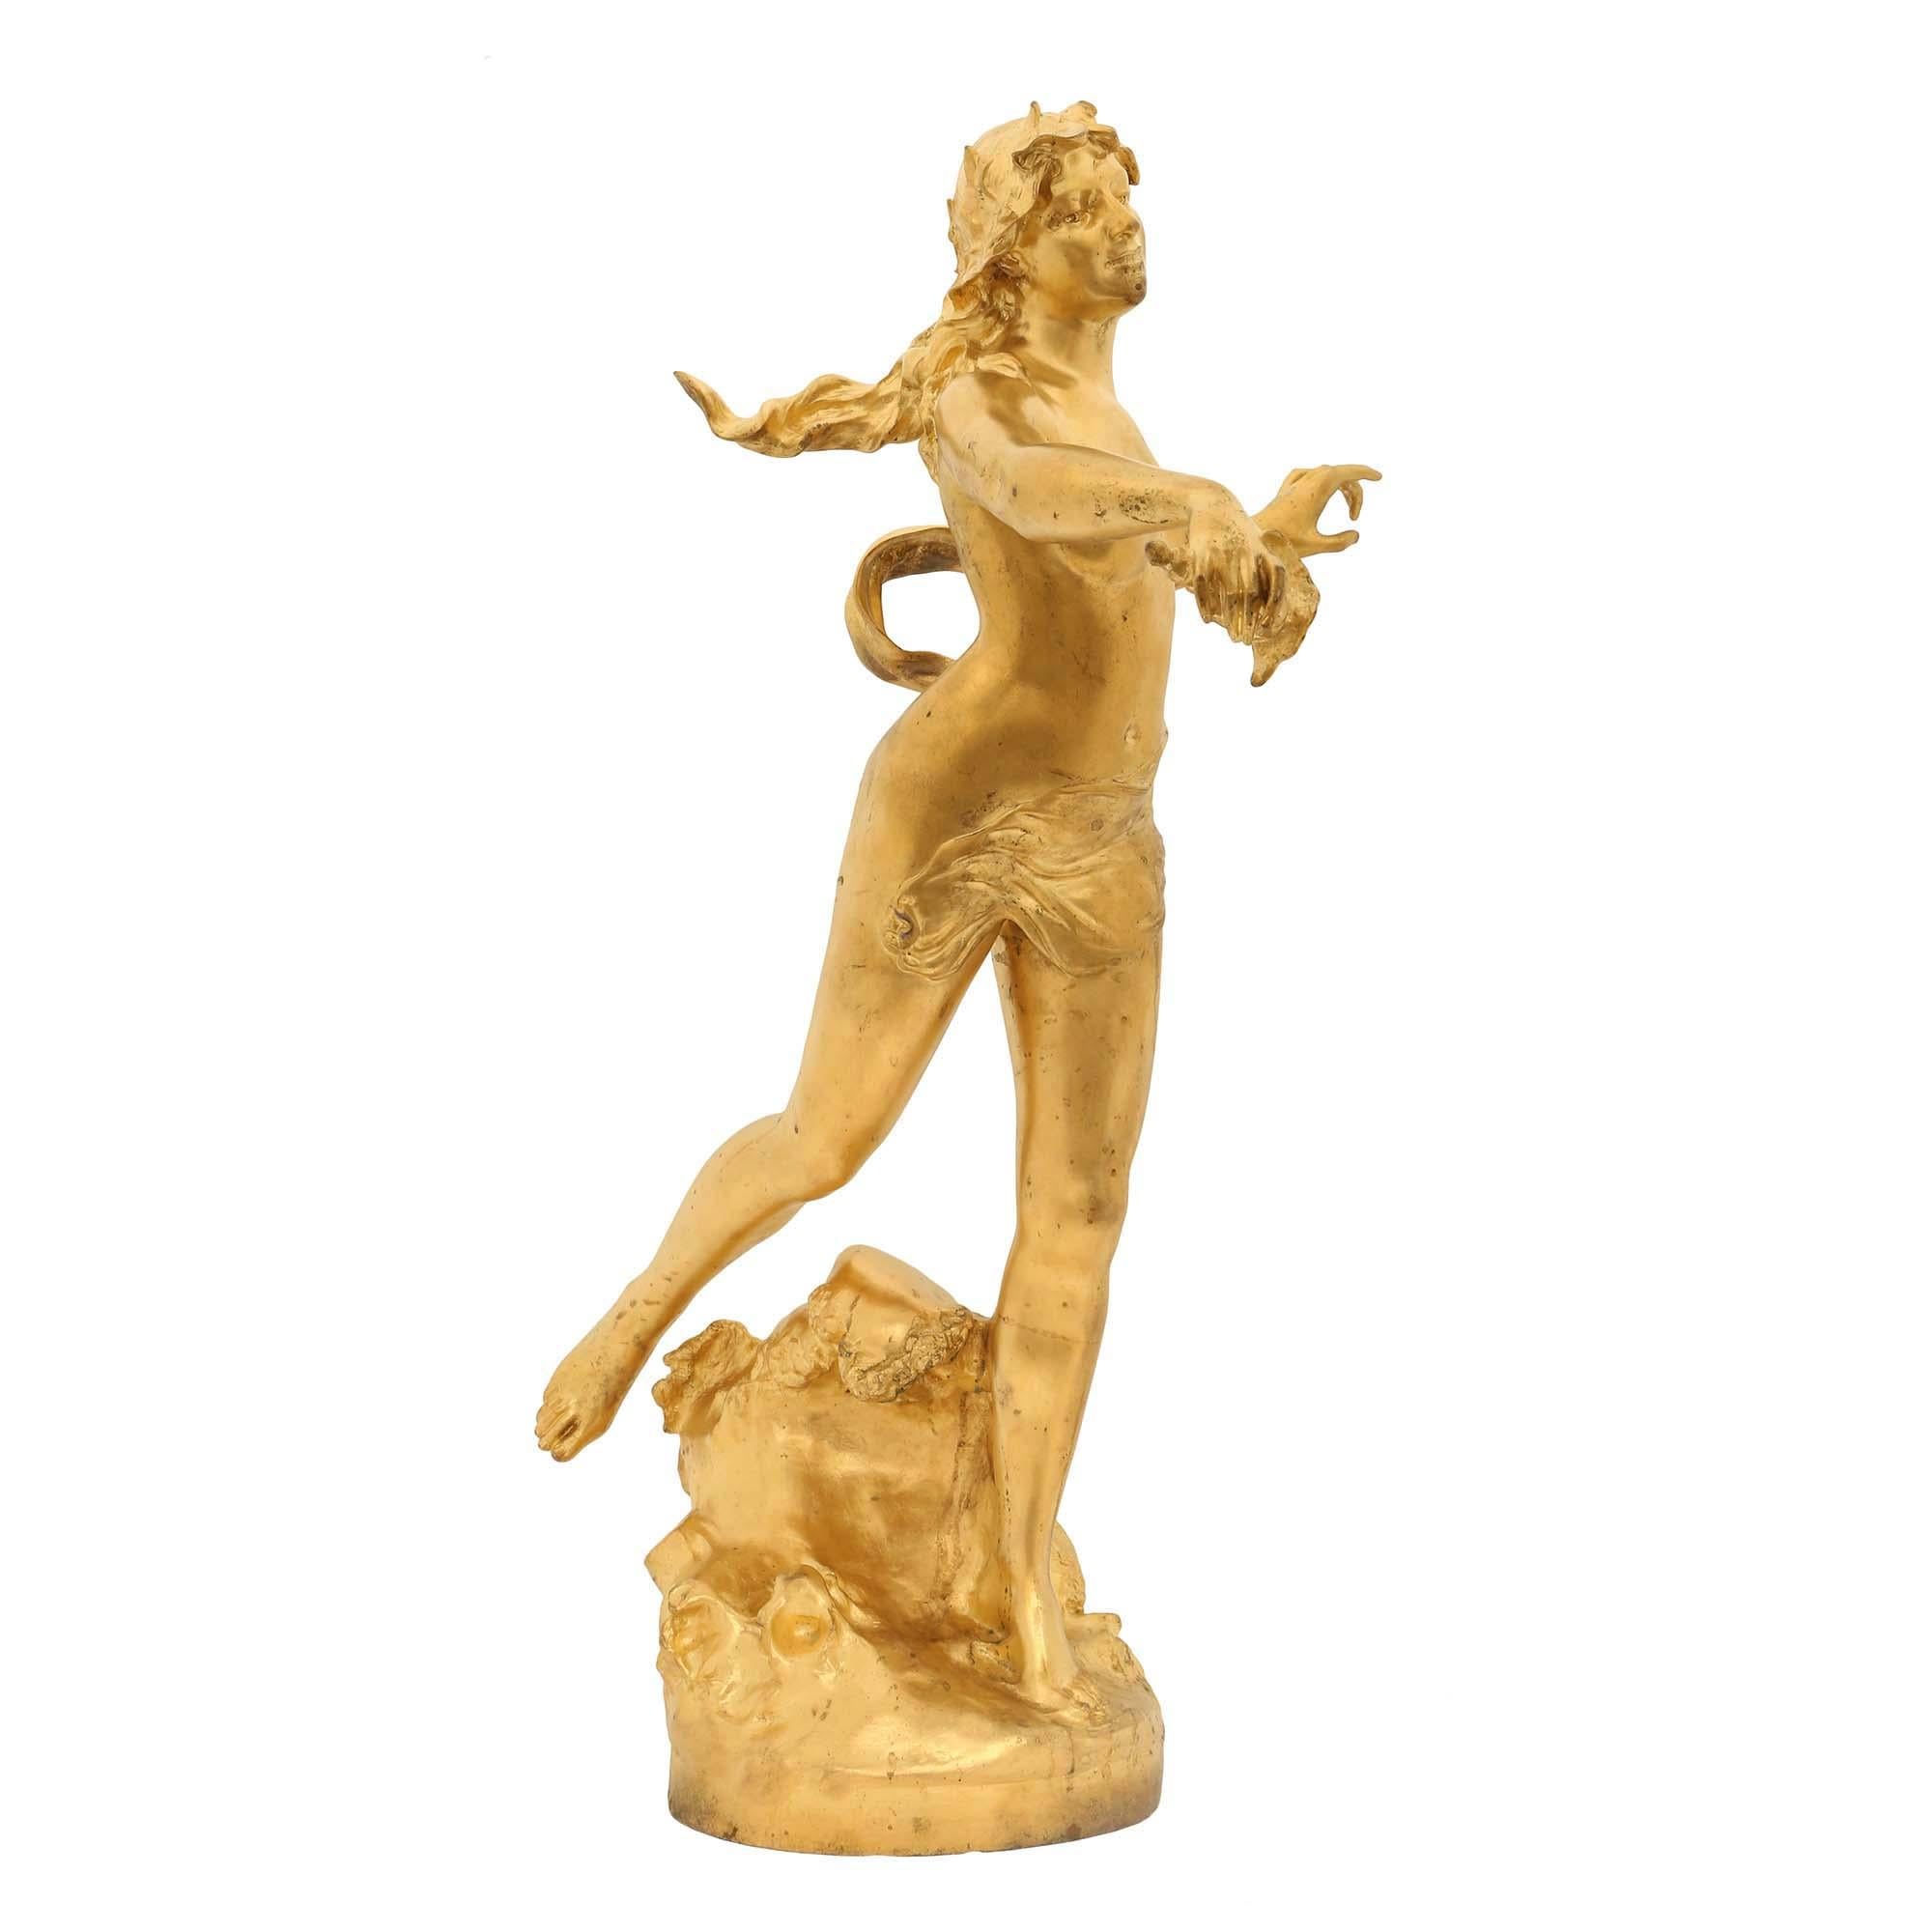  French 19th Century Ormolu Statue of Nereids, Signed Claude-André Férigoule For Sale 2